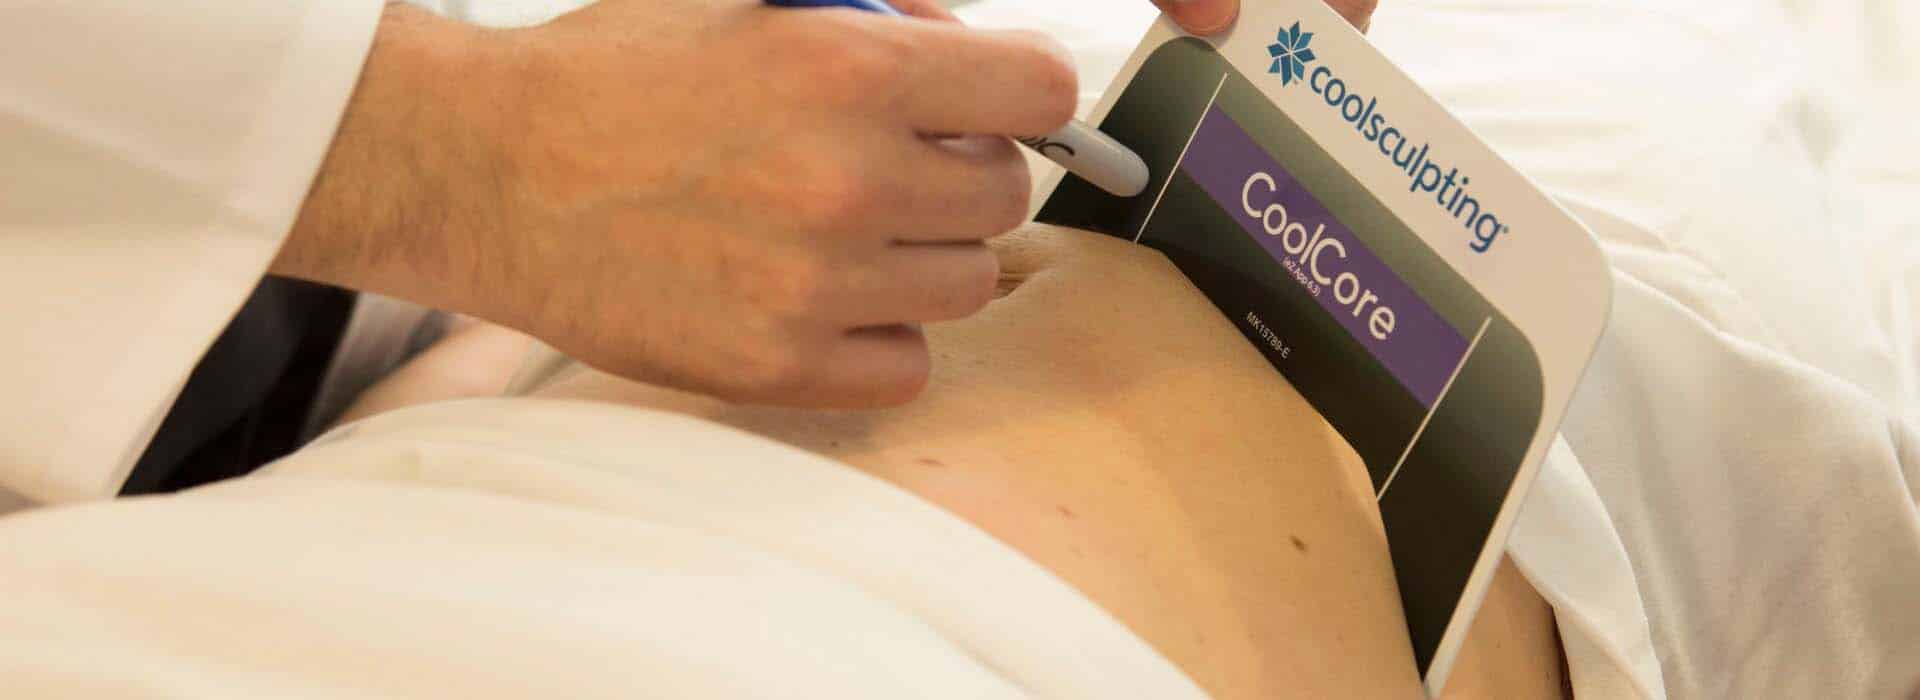 coolscupting en madrid clinica beauty one center